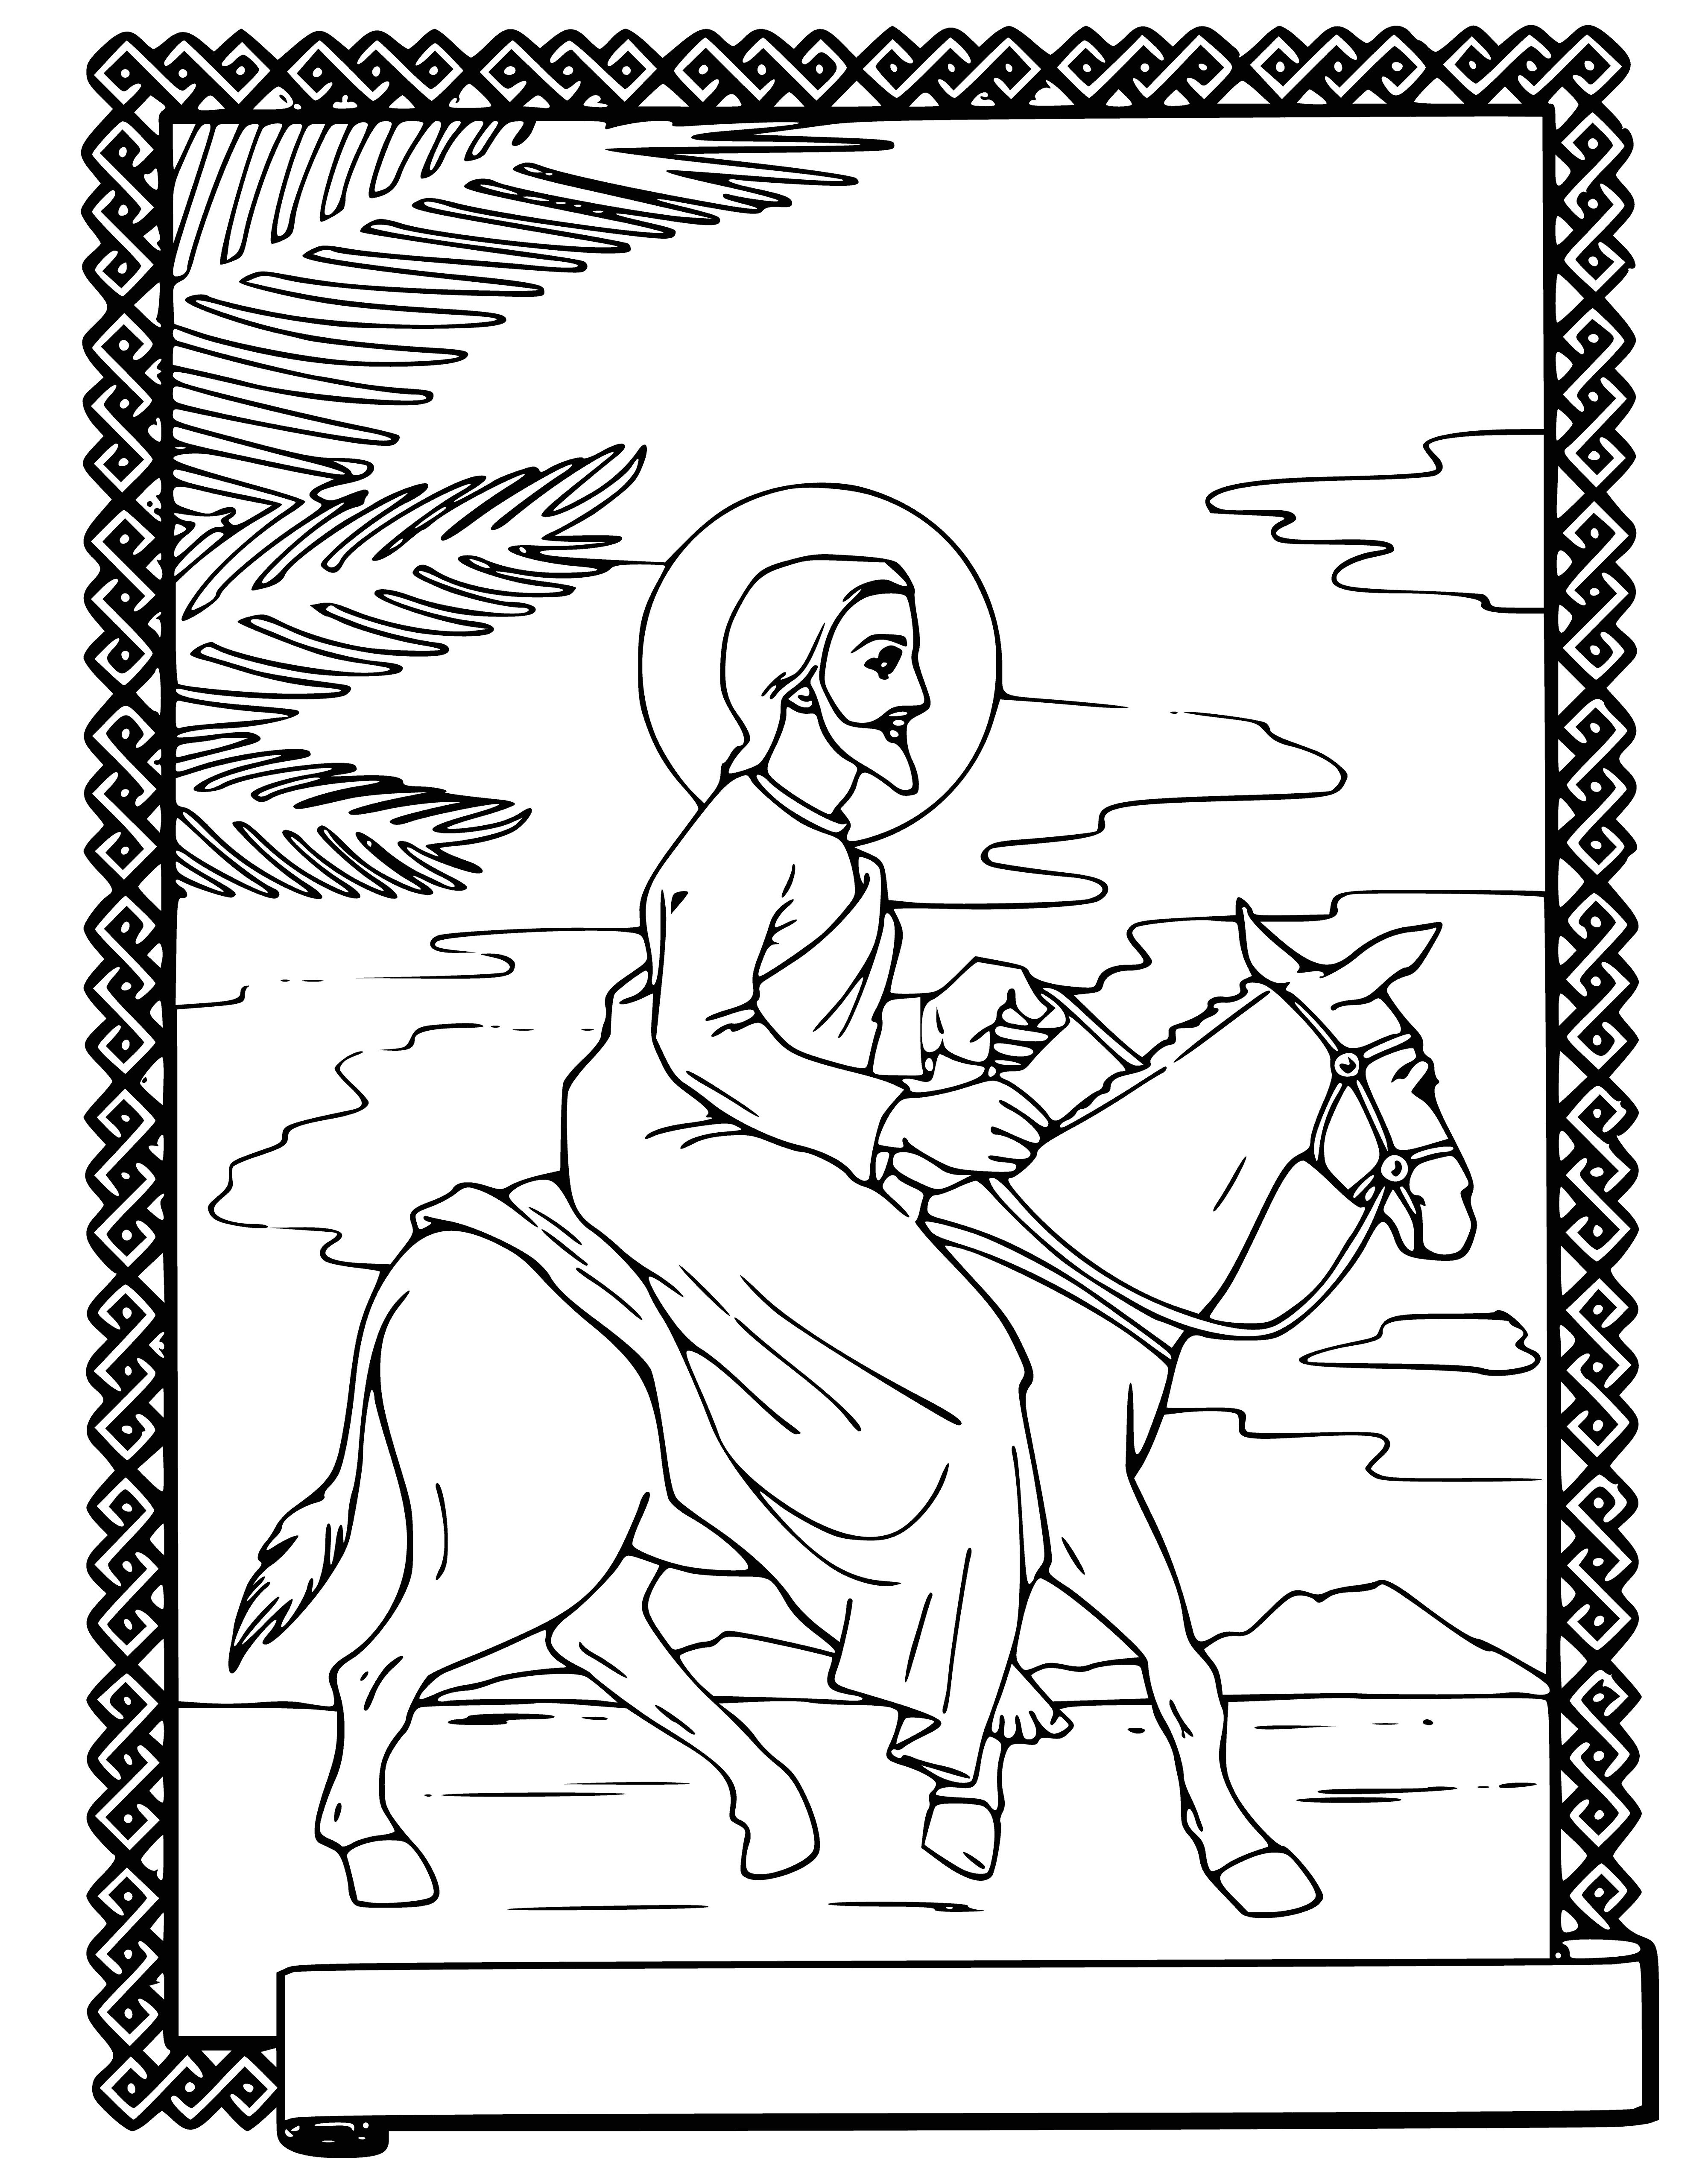 coloring page: Carrying palm/olive branches & singing, people walk towards golden gates with angels & trumpets in the sky - celebrating the Entry of the Lord into Jerusalem.